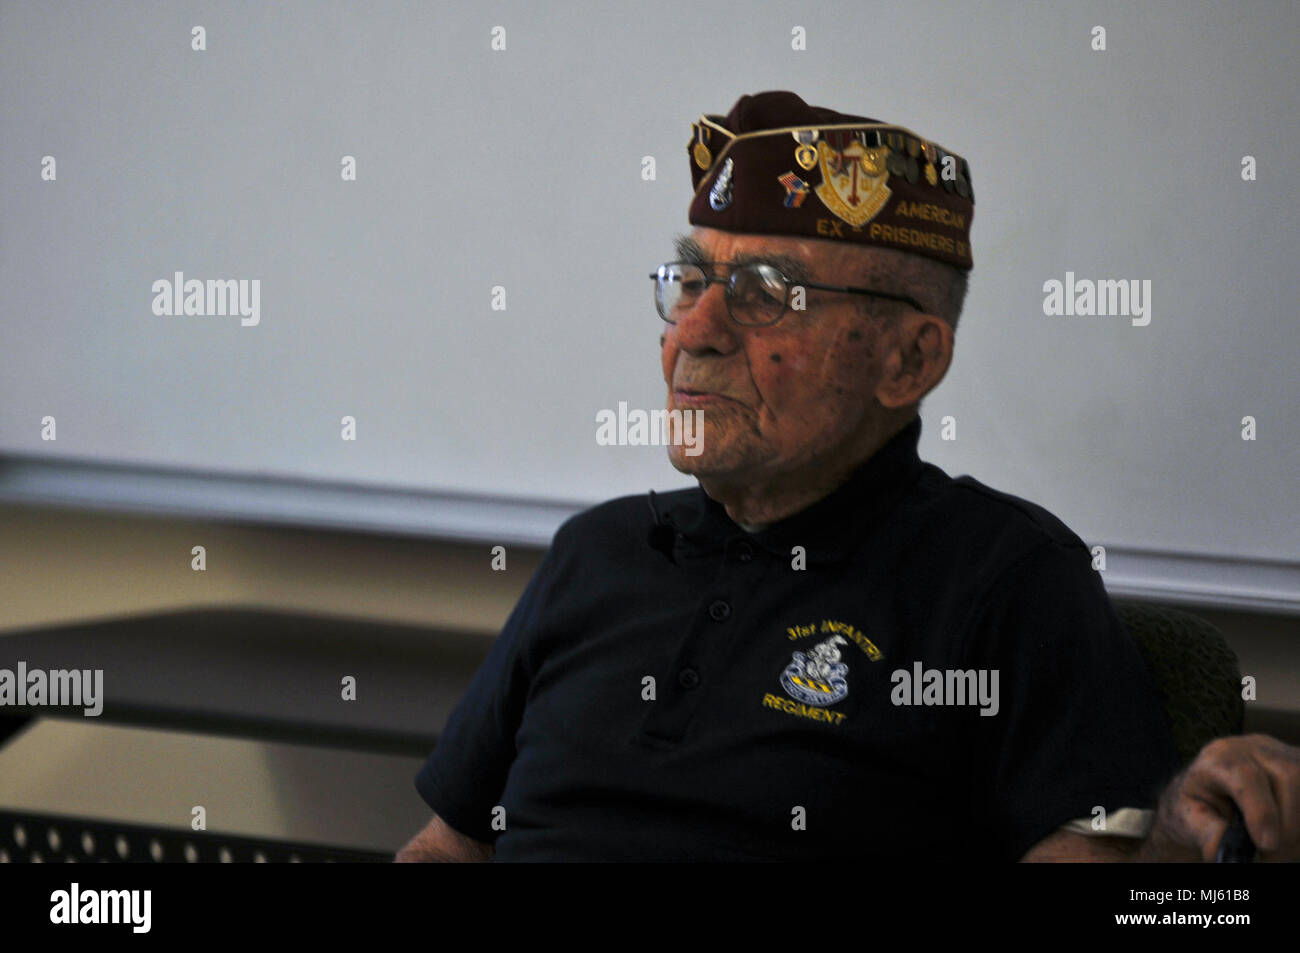 Paul Kerchum, a Chief Master Sgt. (Ret.) with the Air Force and the Army Air Corps, describes his experiences in World War II and his involvement in the Bataan Death March to a crowd of visitors at White Sands Missile Range, New Mexico, March 24, 2018.  Thousands of prisoners of war died in the Bataan Death March, a forced relocation of prisoners in April 1942 through inhospitable jungle, who were denied proper food, water and medical attention.  (U.S. Army Image collection celebrating the bravery dedication commitment and sacrifice of U.S. Armed Forces and civilian personnel. Stock Photo